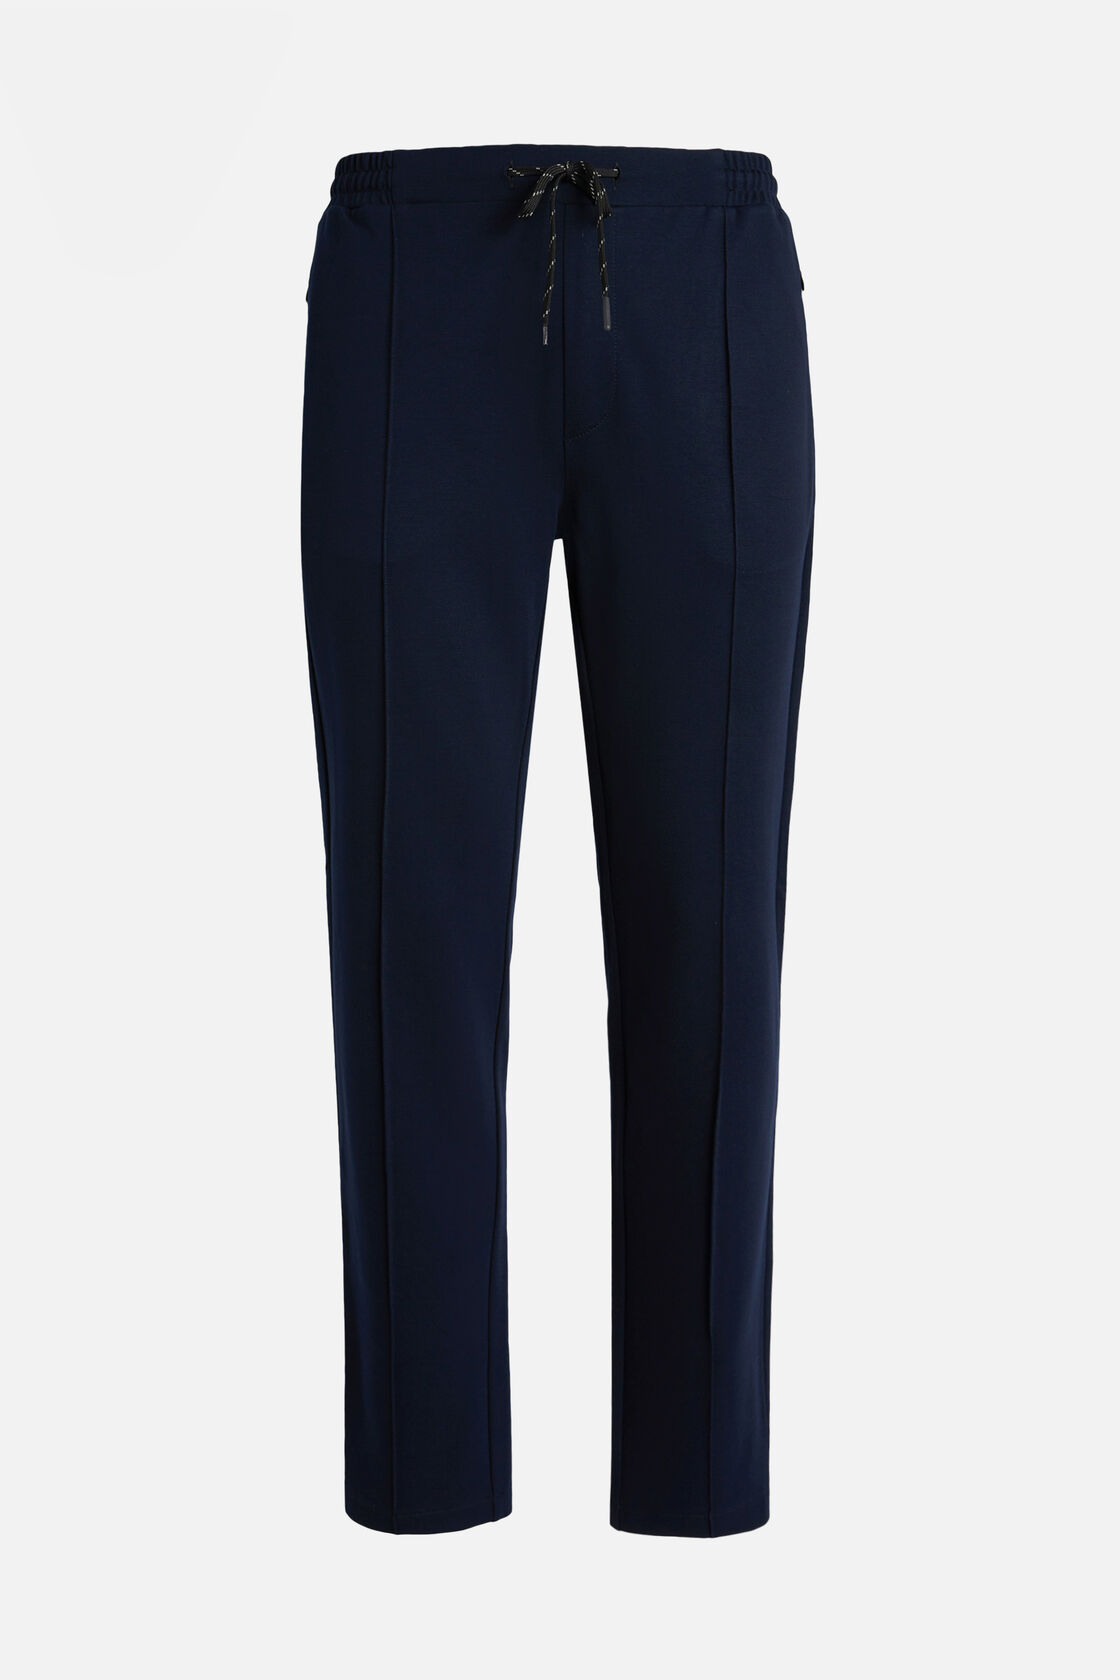 Stretch Interlock Technical Fabric Trousers, Navy blue, hi-res